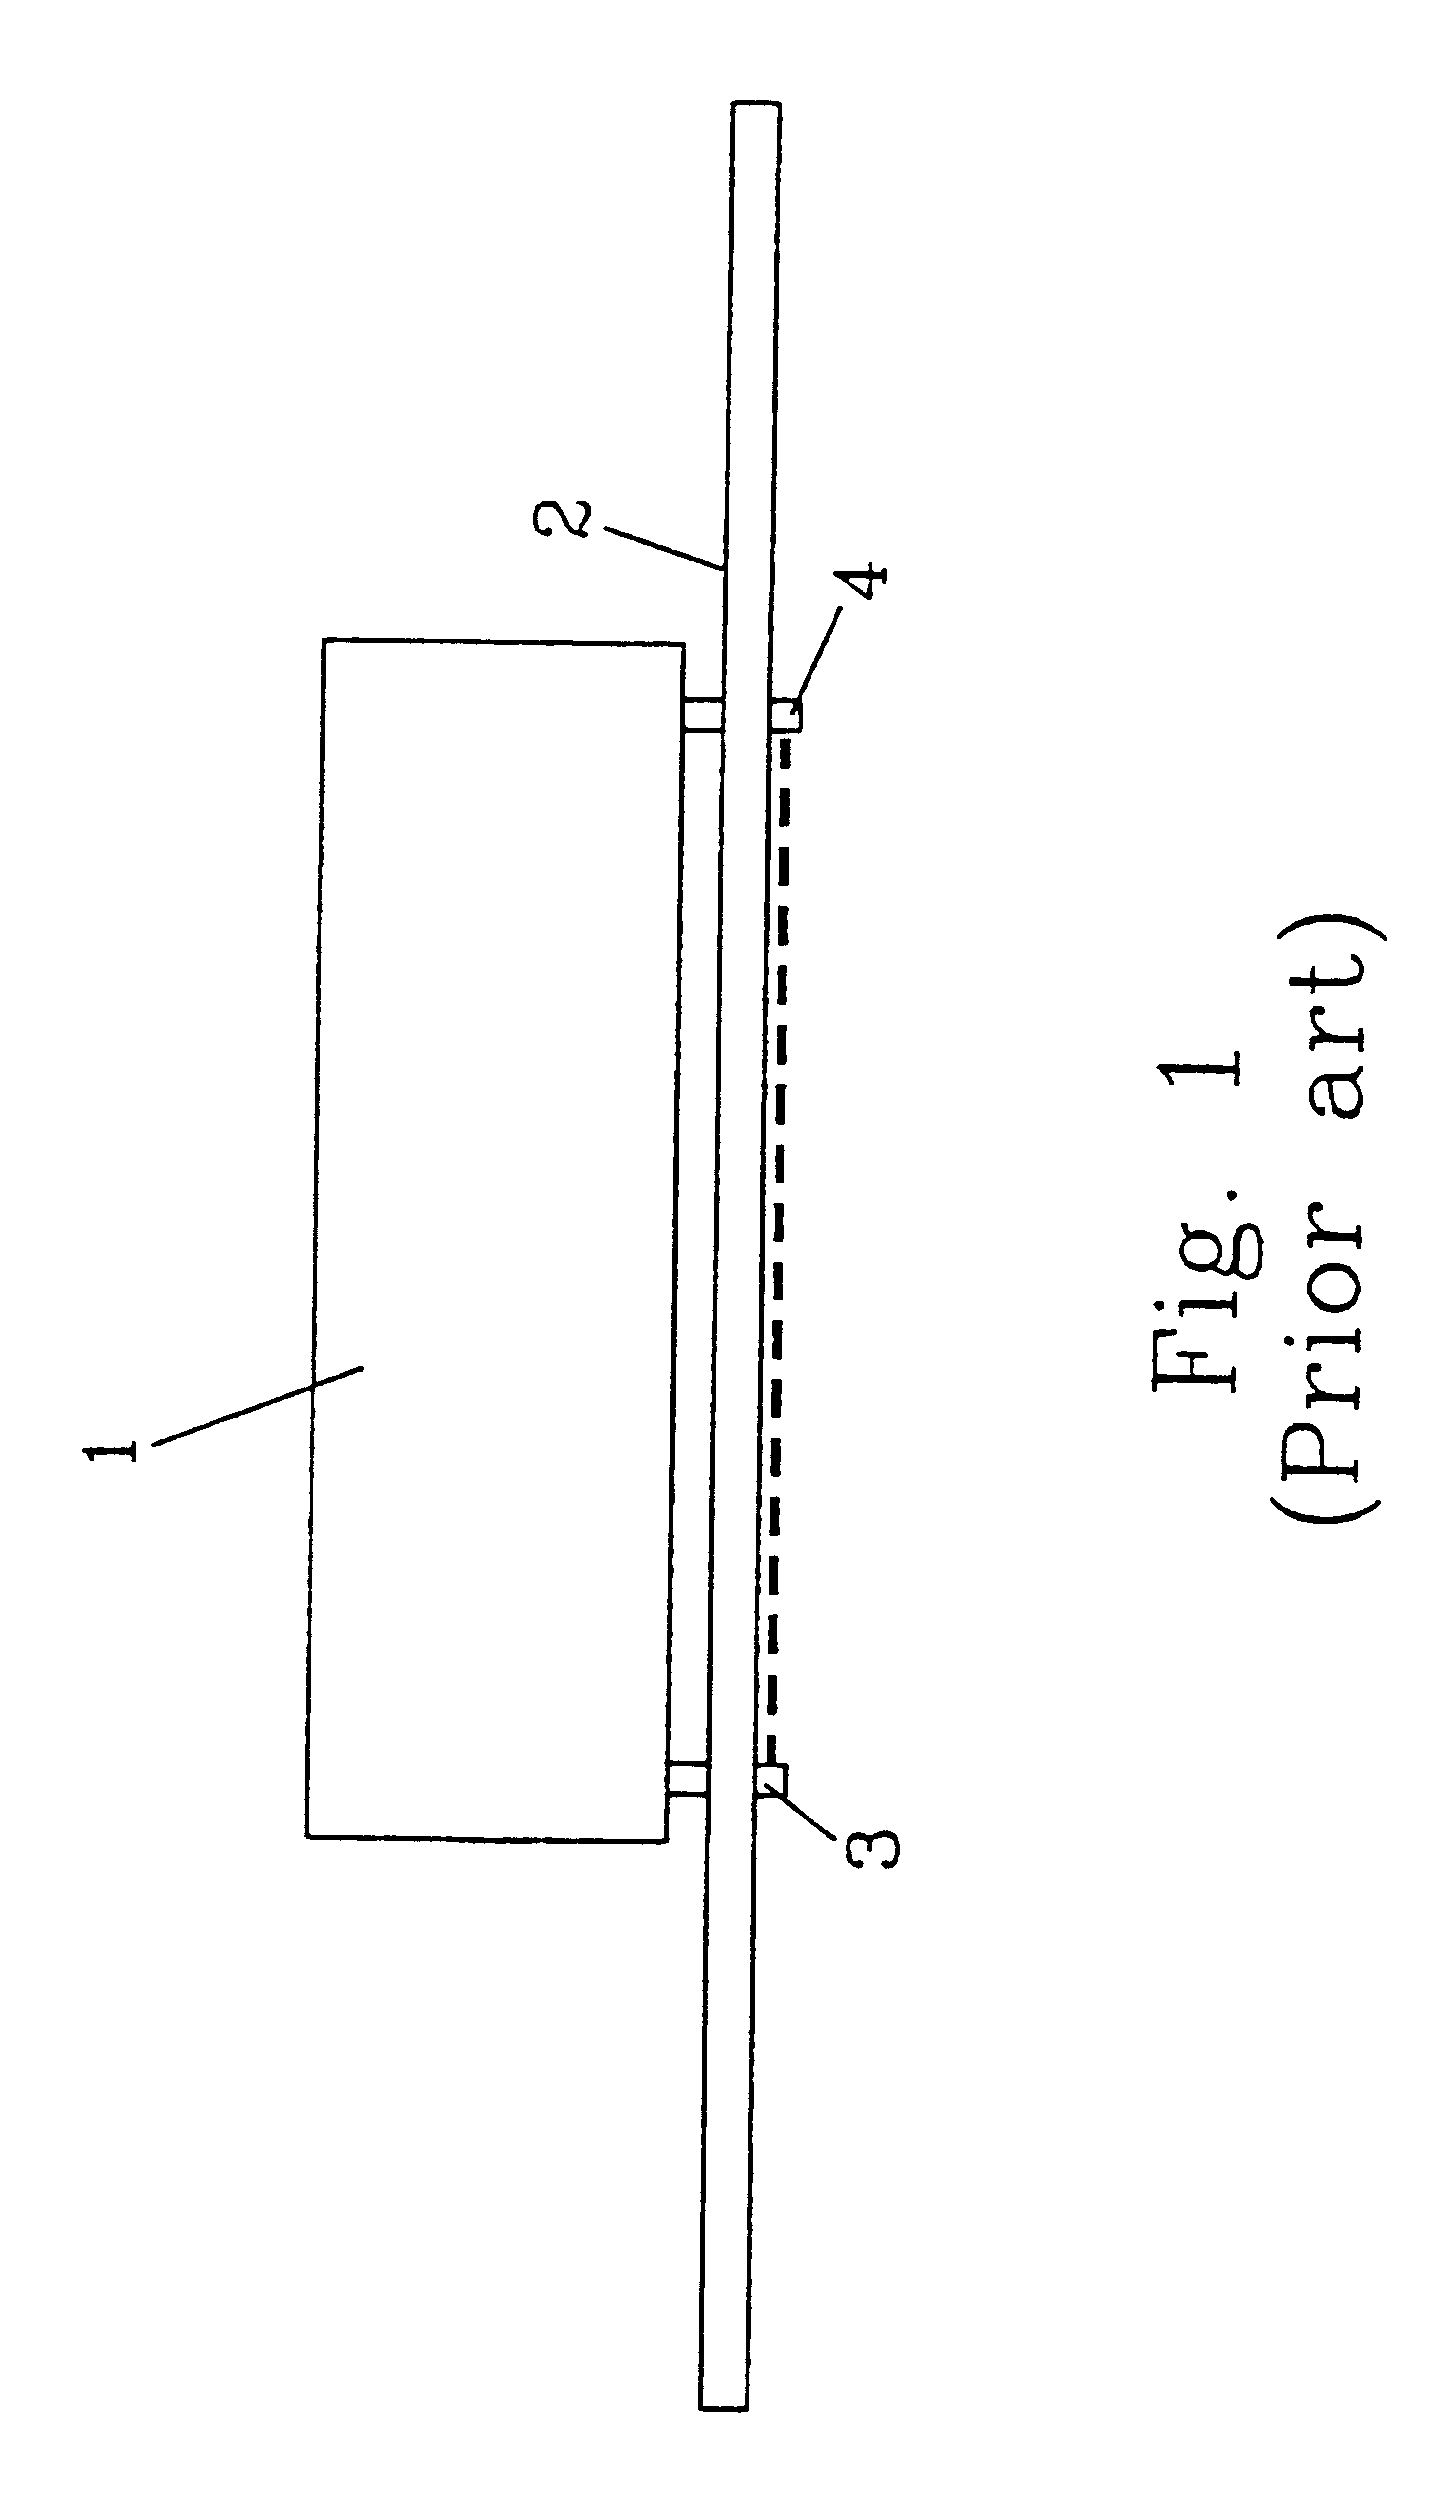 Insulation barrier on a printed circuit board